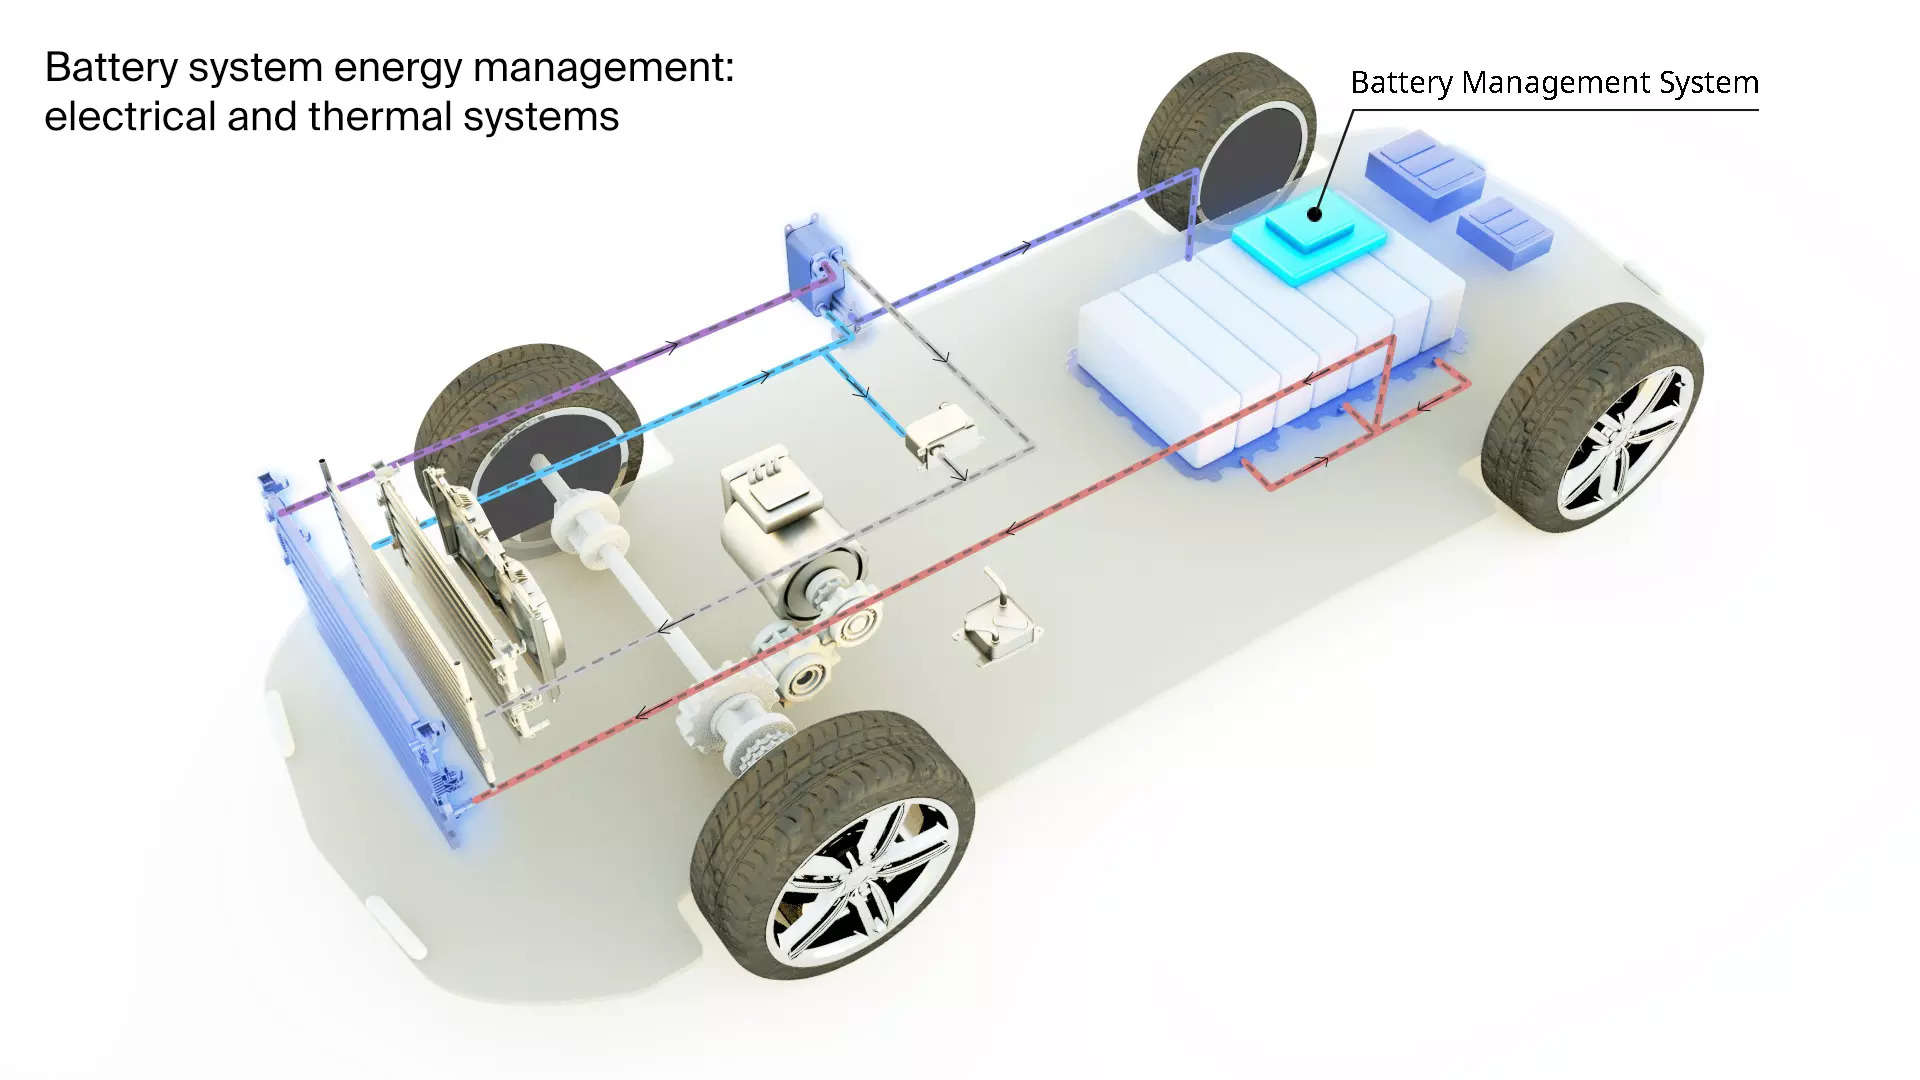  Complemented by proven e-powertrain and thermal design competencies, the battery management capabilities contribute to Marelli’s integrated approach.